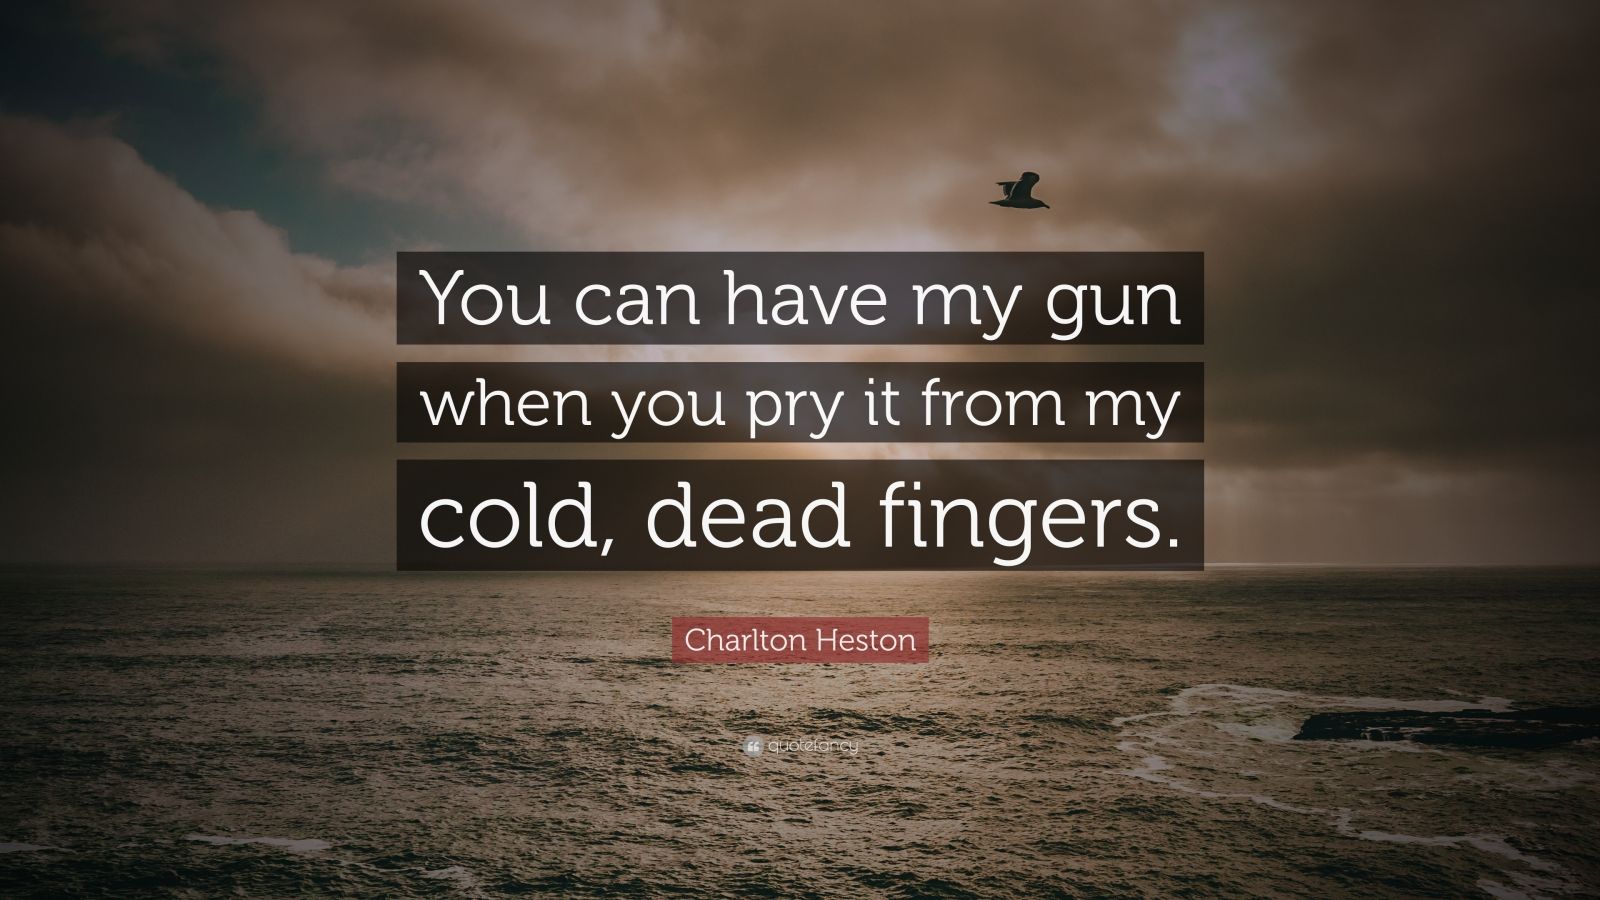 Charlton Heston Quote: “You can have my gun when you pry it from my